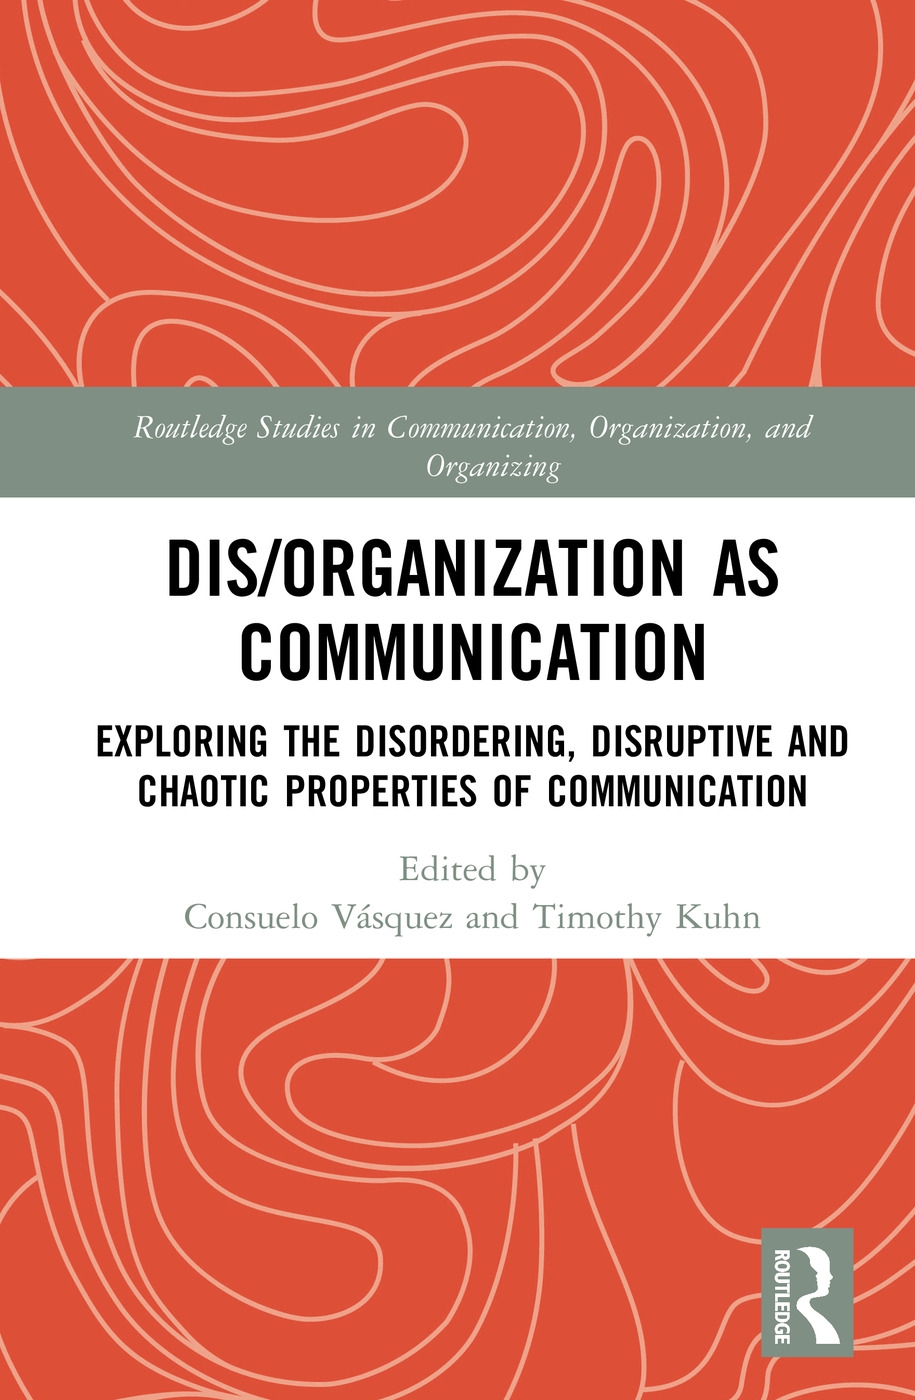 Dis/Organization as Communication: Exploring the Disordering, Disruptive and Chaotic Properties of Communication